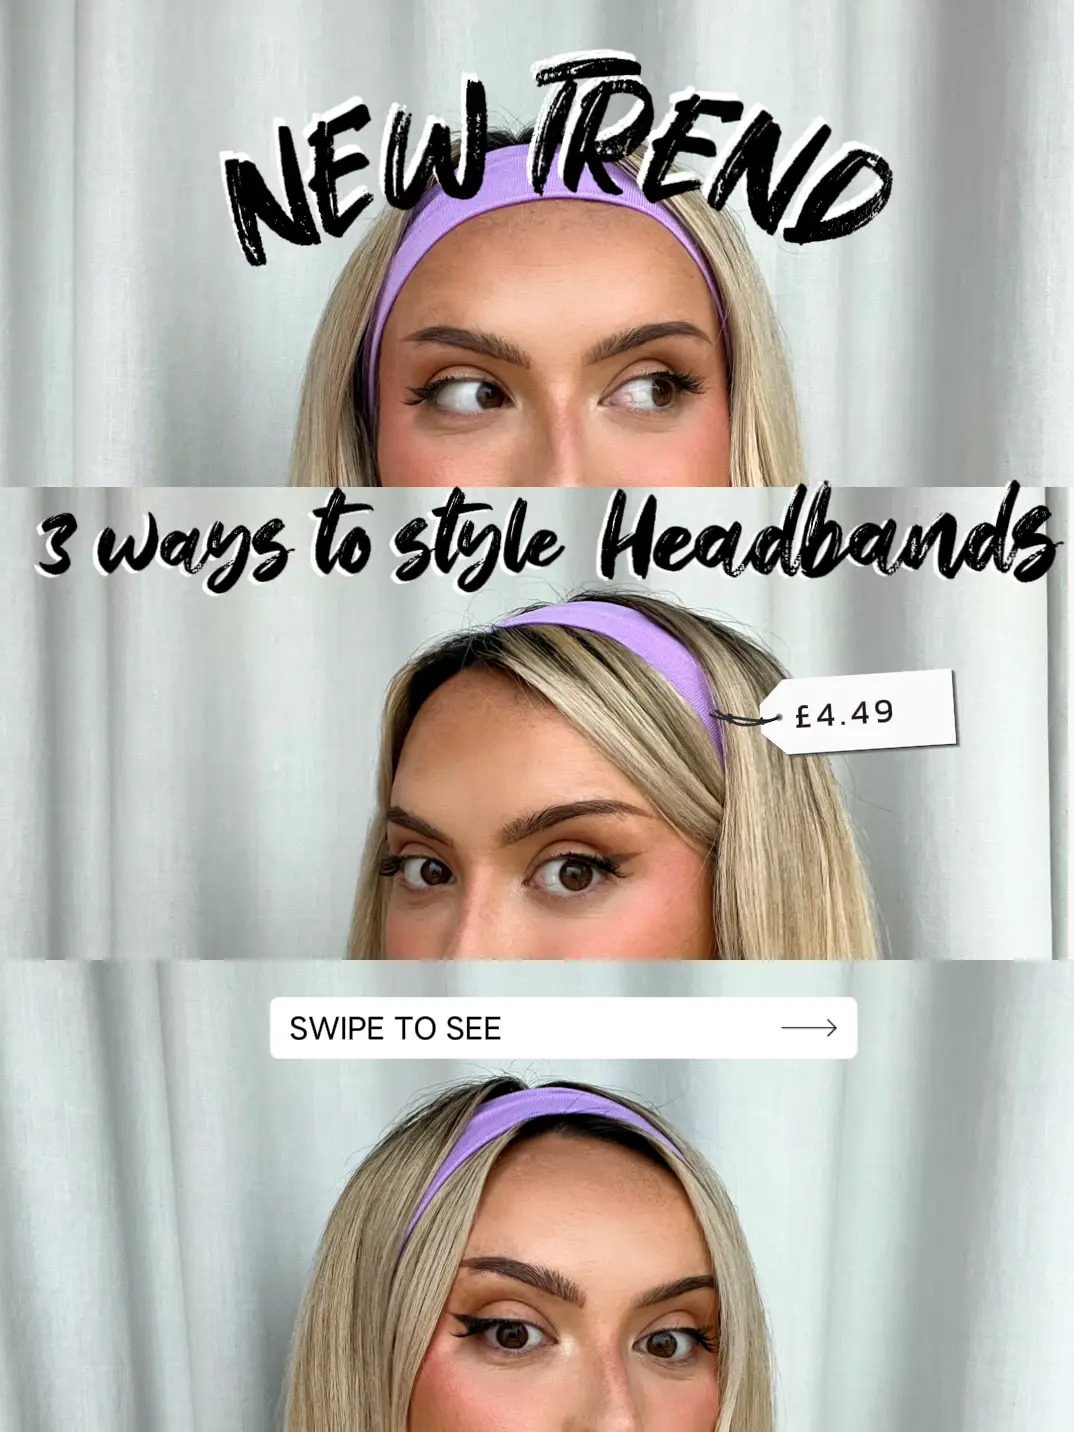  Three pictures of a woman with a headband on.